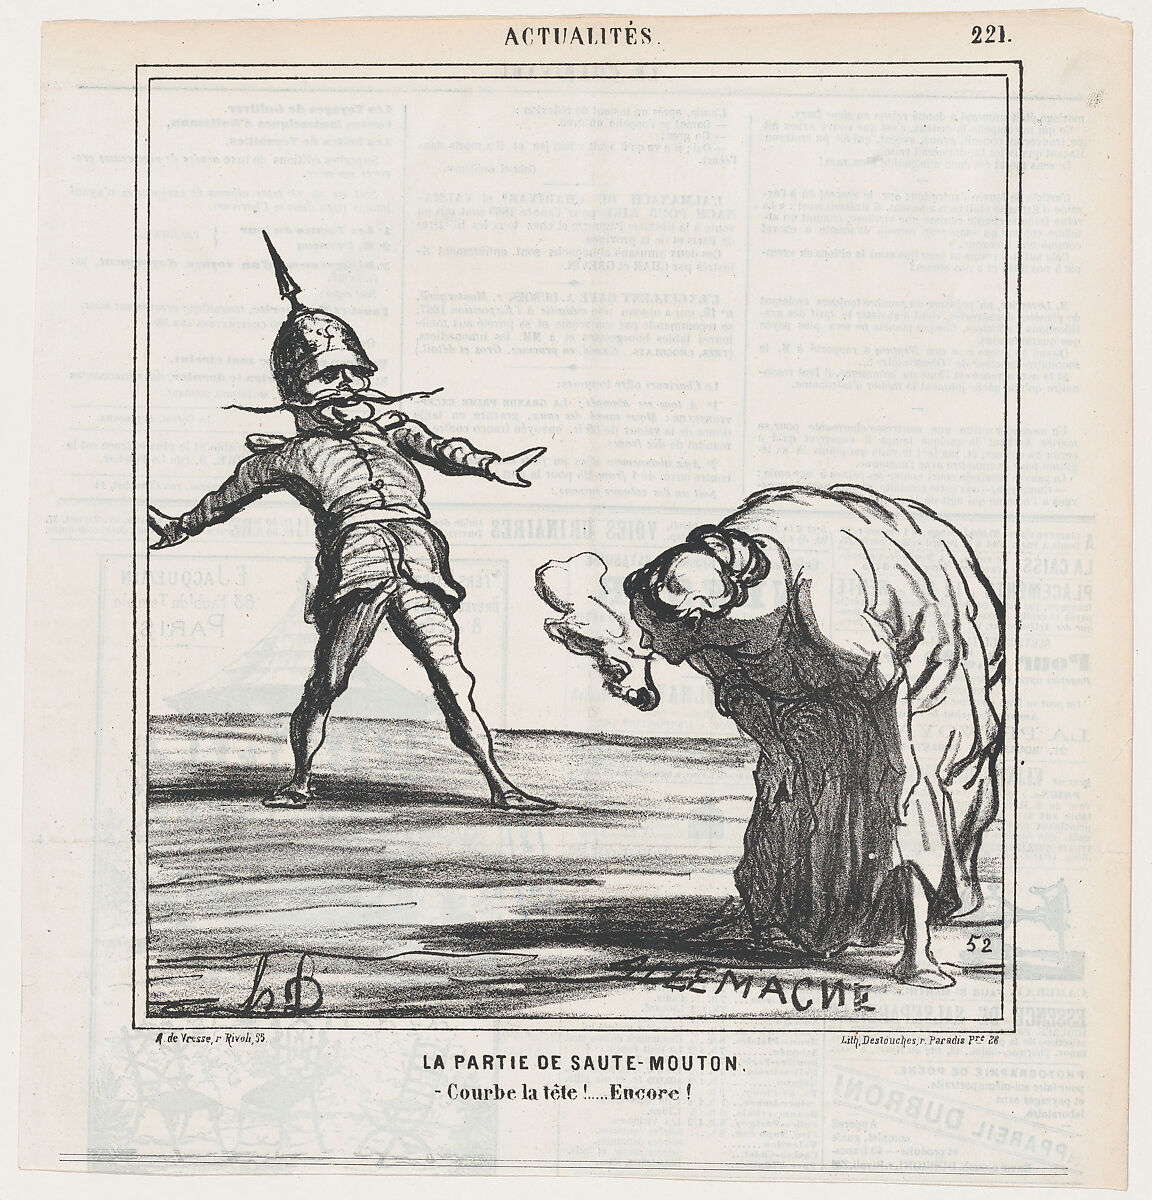 The leapfrog game: Bend your head down! Again!, from 'News of the day,' published in "Le Charivari", Honoré Daumier (French, Marseilles 1808–1879 Valmondois), Lithograph on newsprint; second state of two (Delteil) 